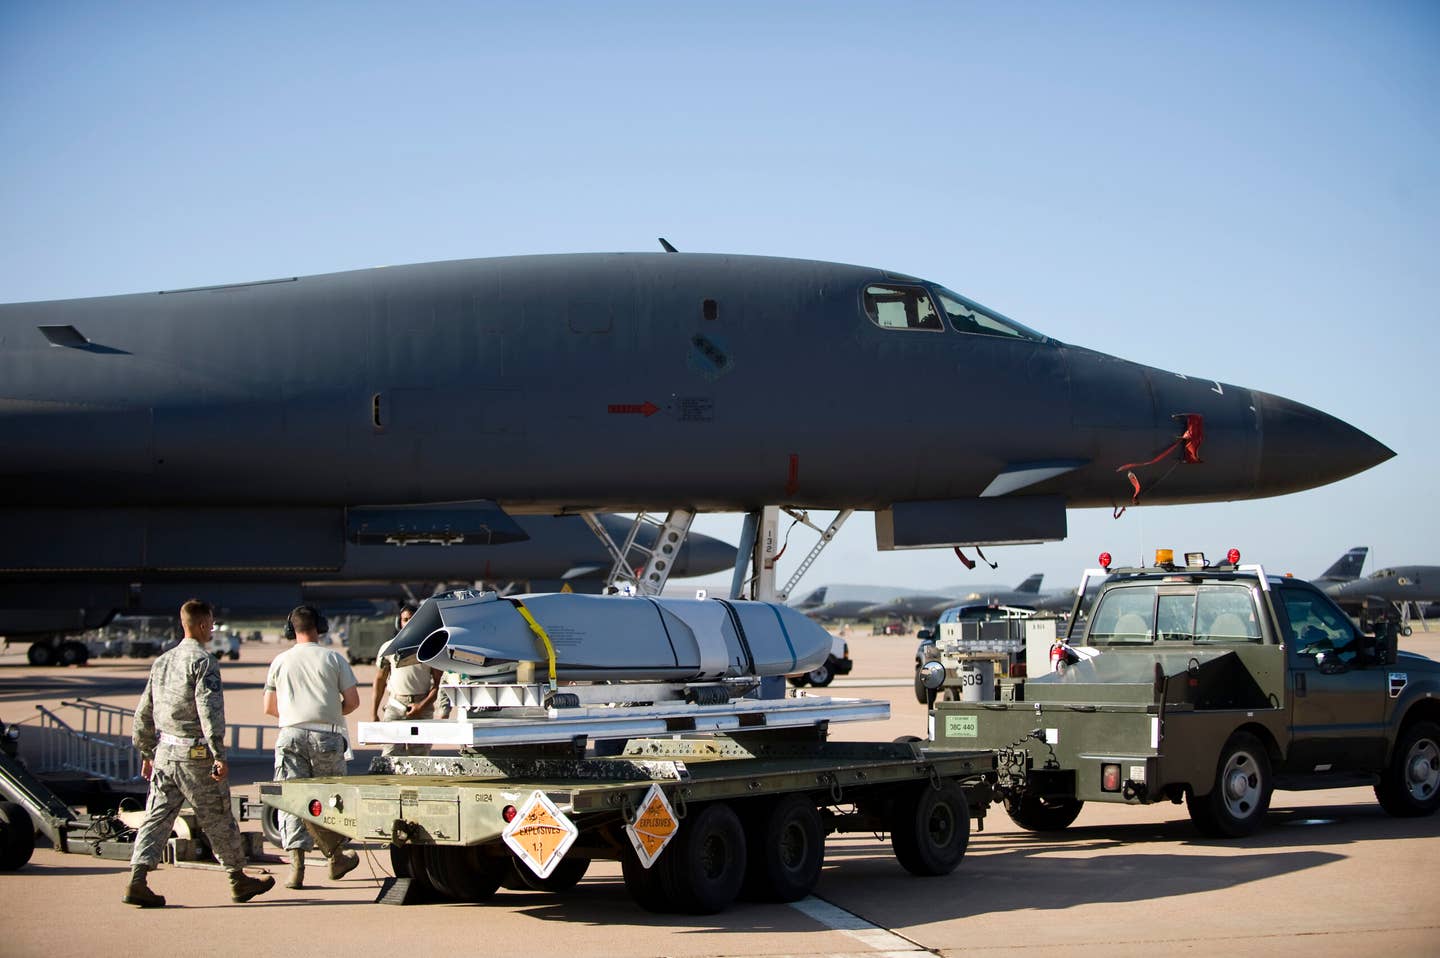 Airmen from the 7th Munitions Squadron transport a Long Range Anti-Ship Missile (LRASM) toward a B-1B at Dyess Air Force Base, Texas. <em>U.S. Air Force photo by Airman 1st Class Damon Kasberg/Released</em><br>